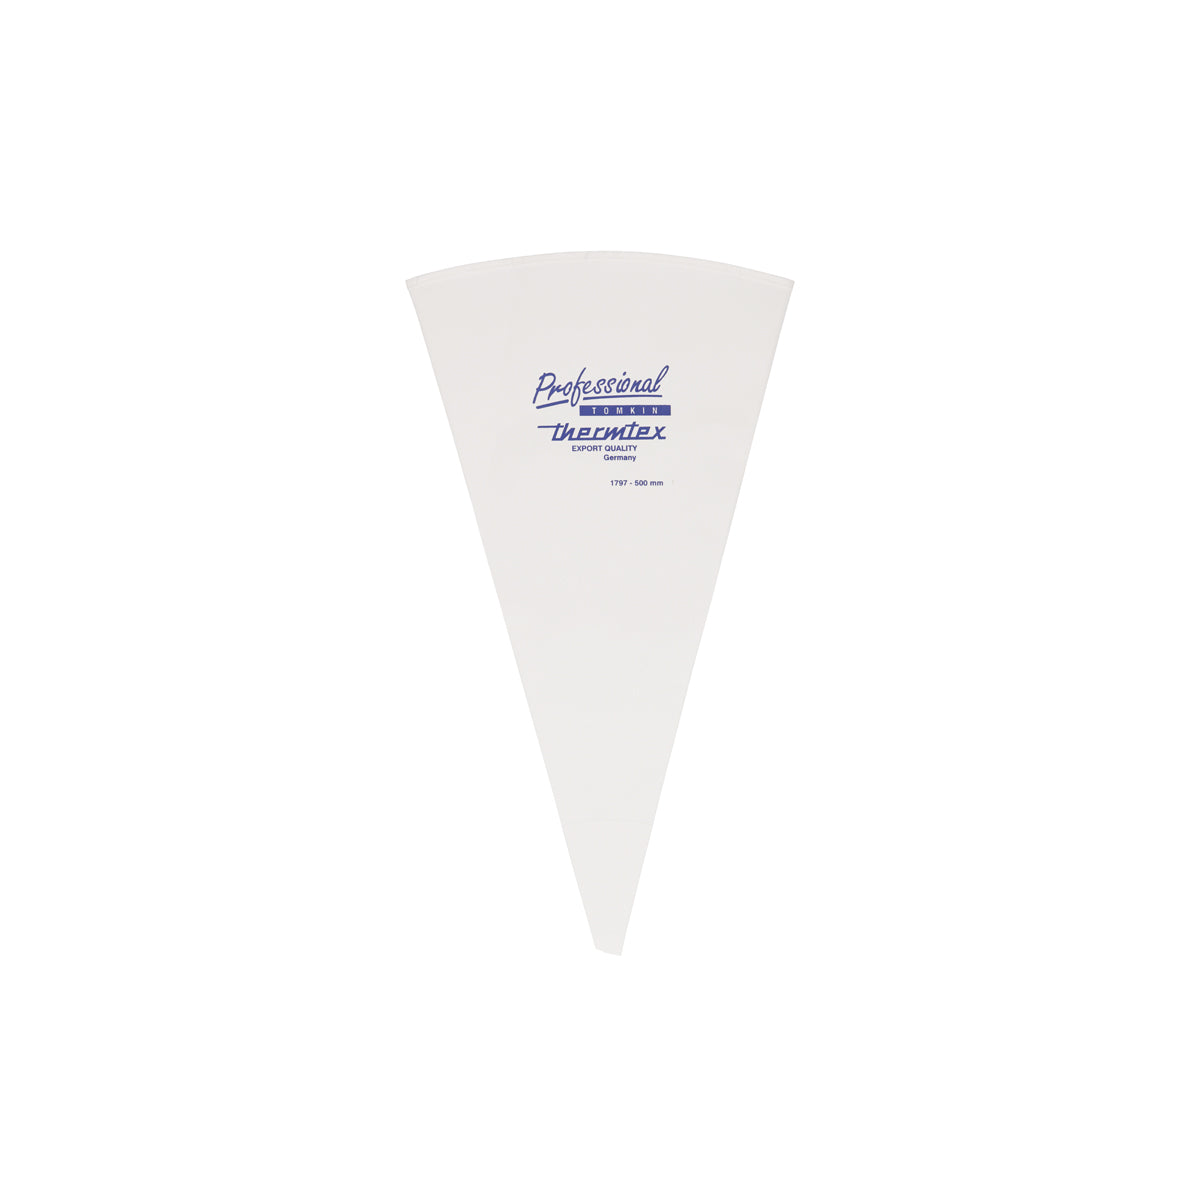 01797 Thermohauser Export Pastry Bag 500mm Tomkin Australia Hospitality Supplies